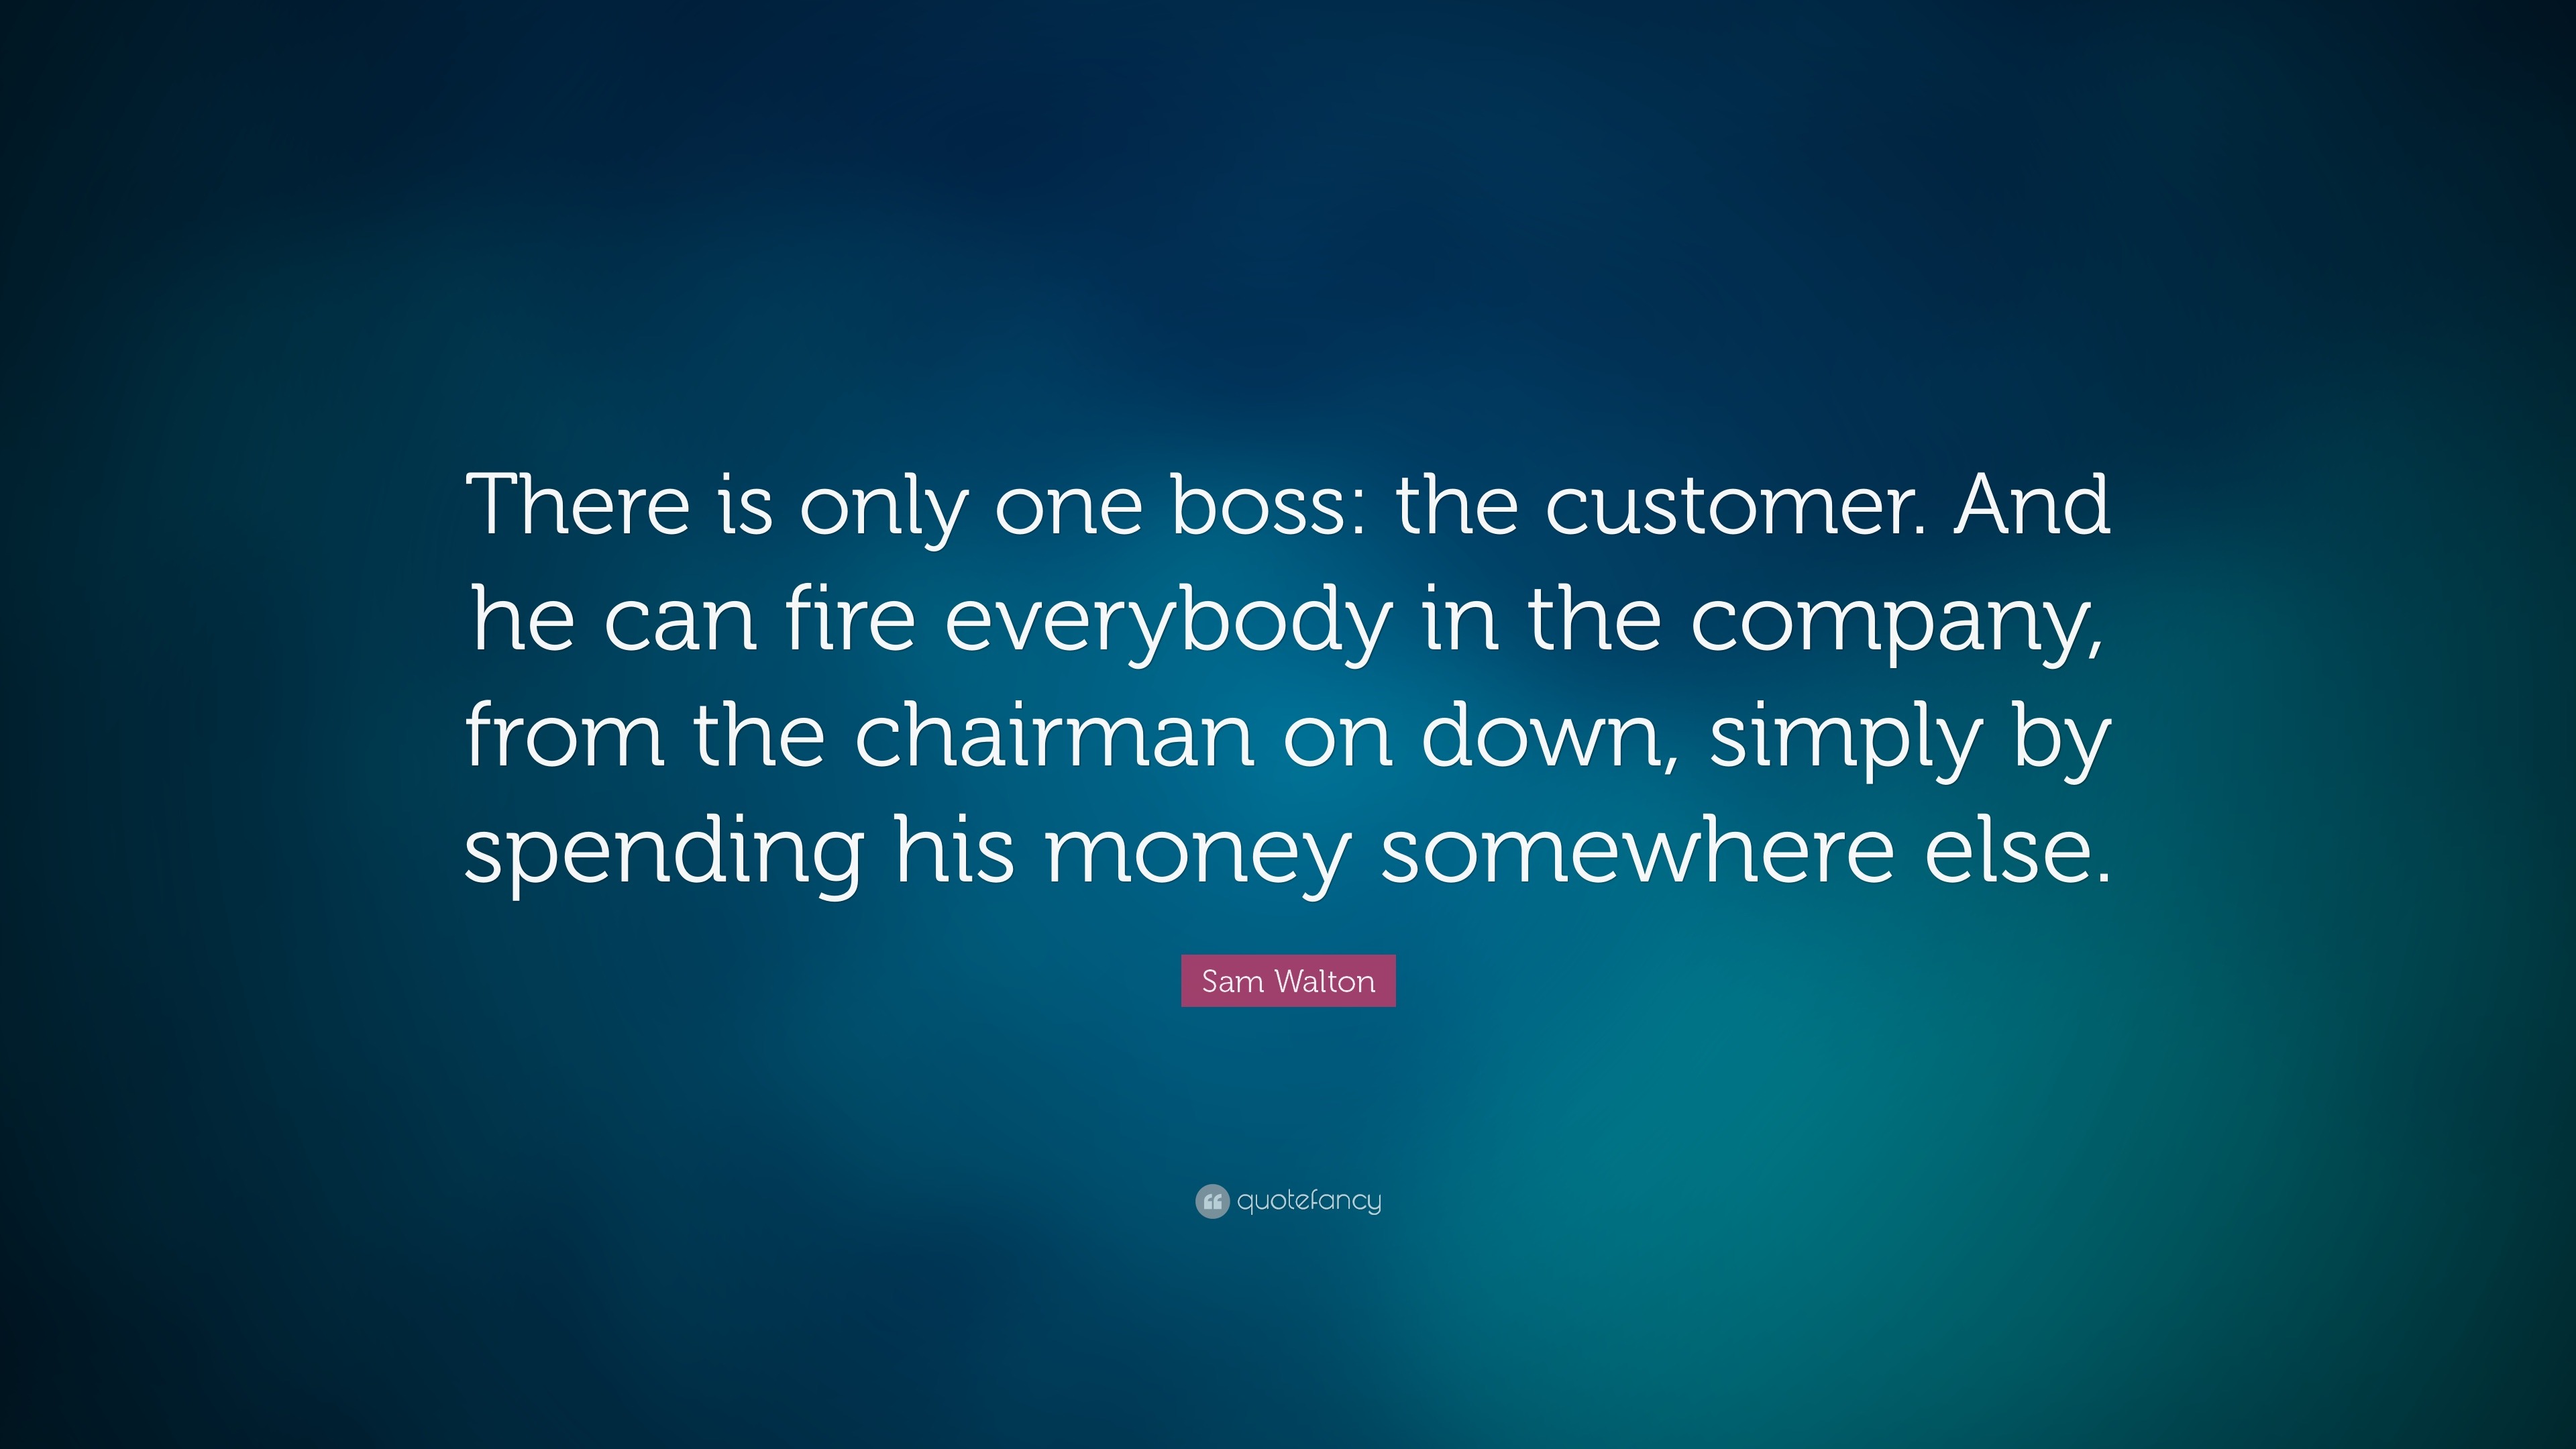 Walton Quote: “There is only boss: the customer. And he can fire everybody in the company, from the chairman on down, simply spe...”